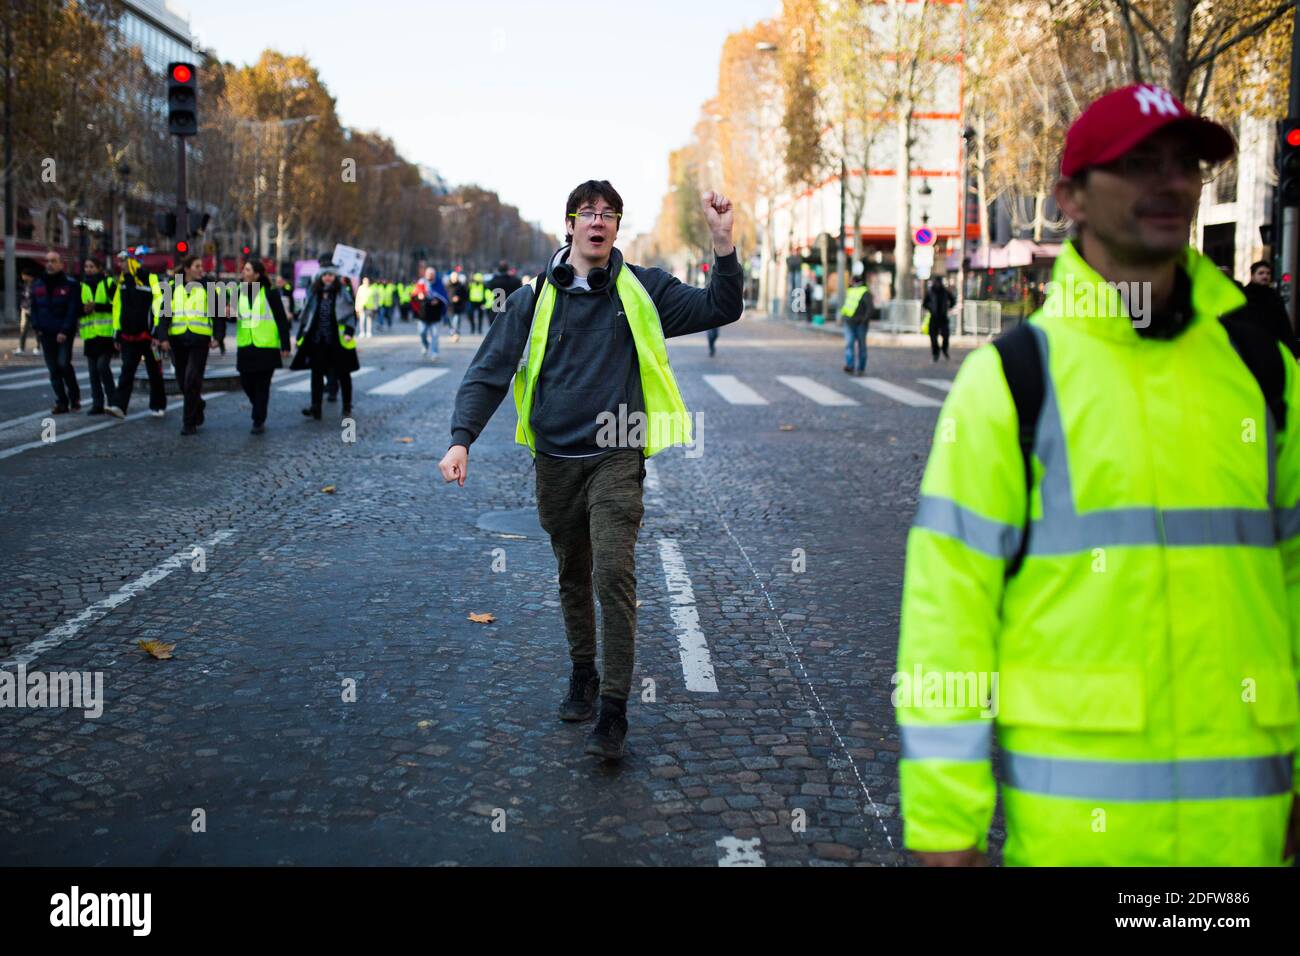 People block the traffic of Paris' landmark Avenue des Champs Elysees on  November 17, 2018 in Paris, during a nationwide popular initiated day of  protest called "yellow vest" (Gilets Jaunes in French)movement